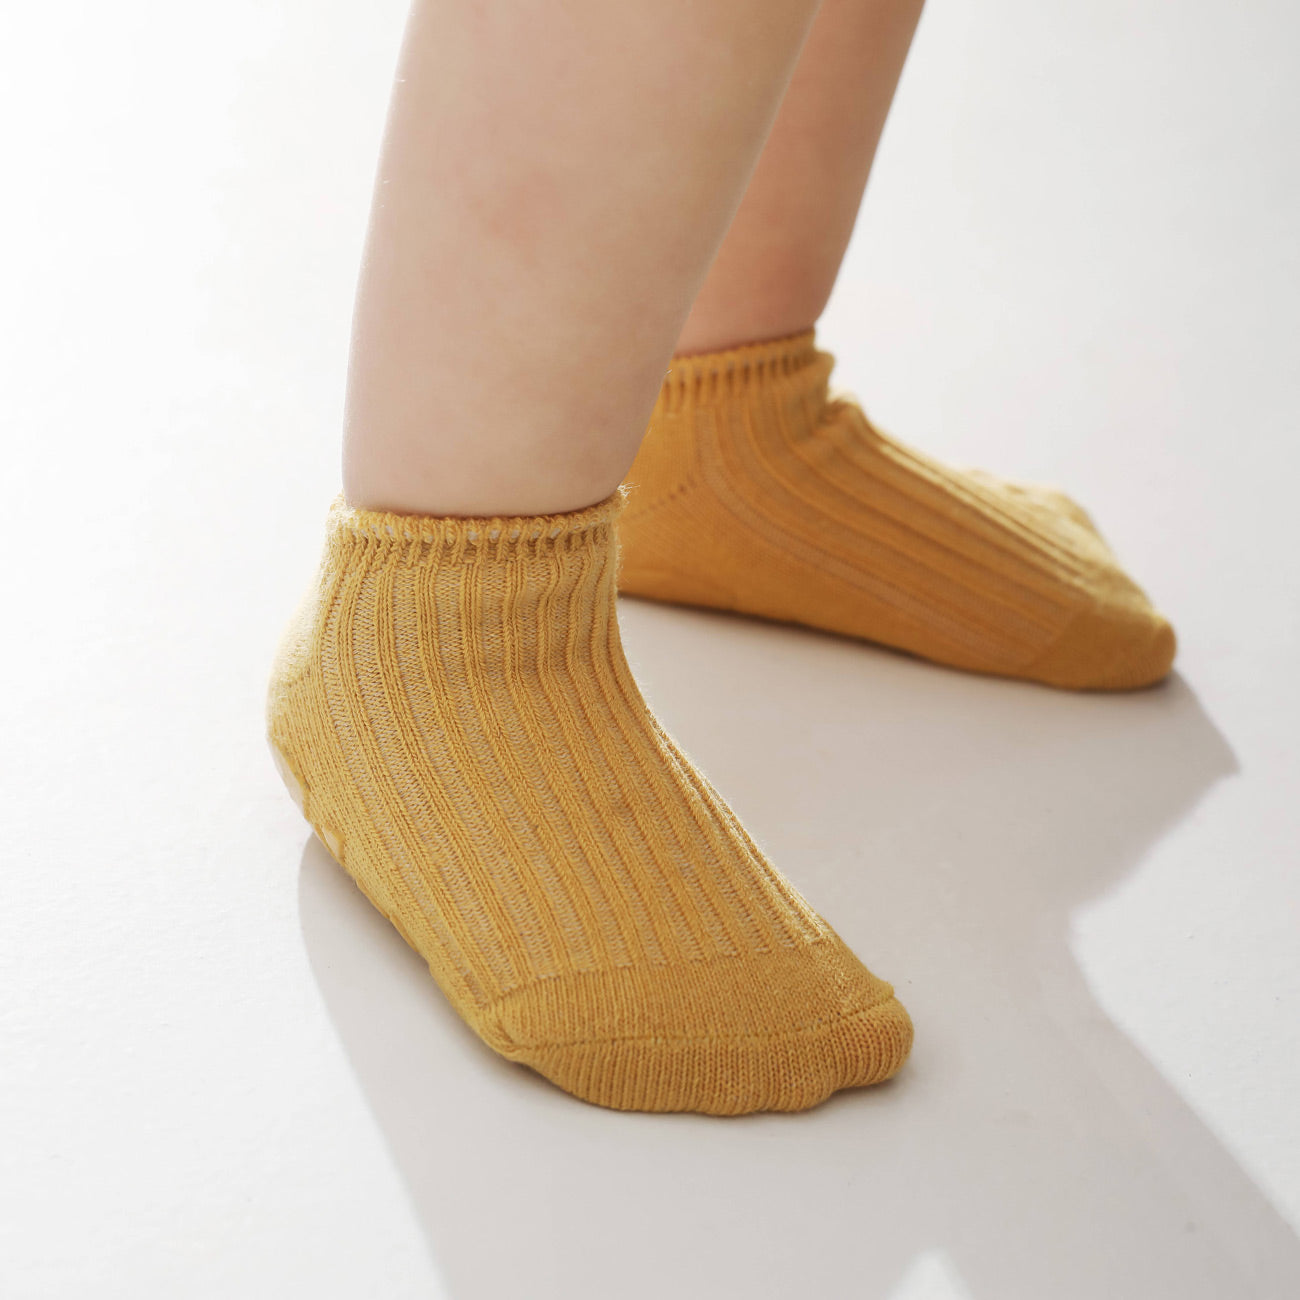 Candy Mountain Shoe-Socks with Non-Slip Grip for Toddlers